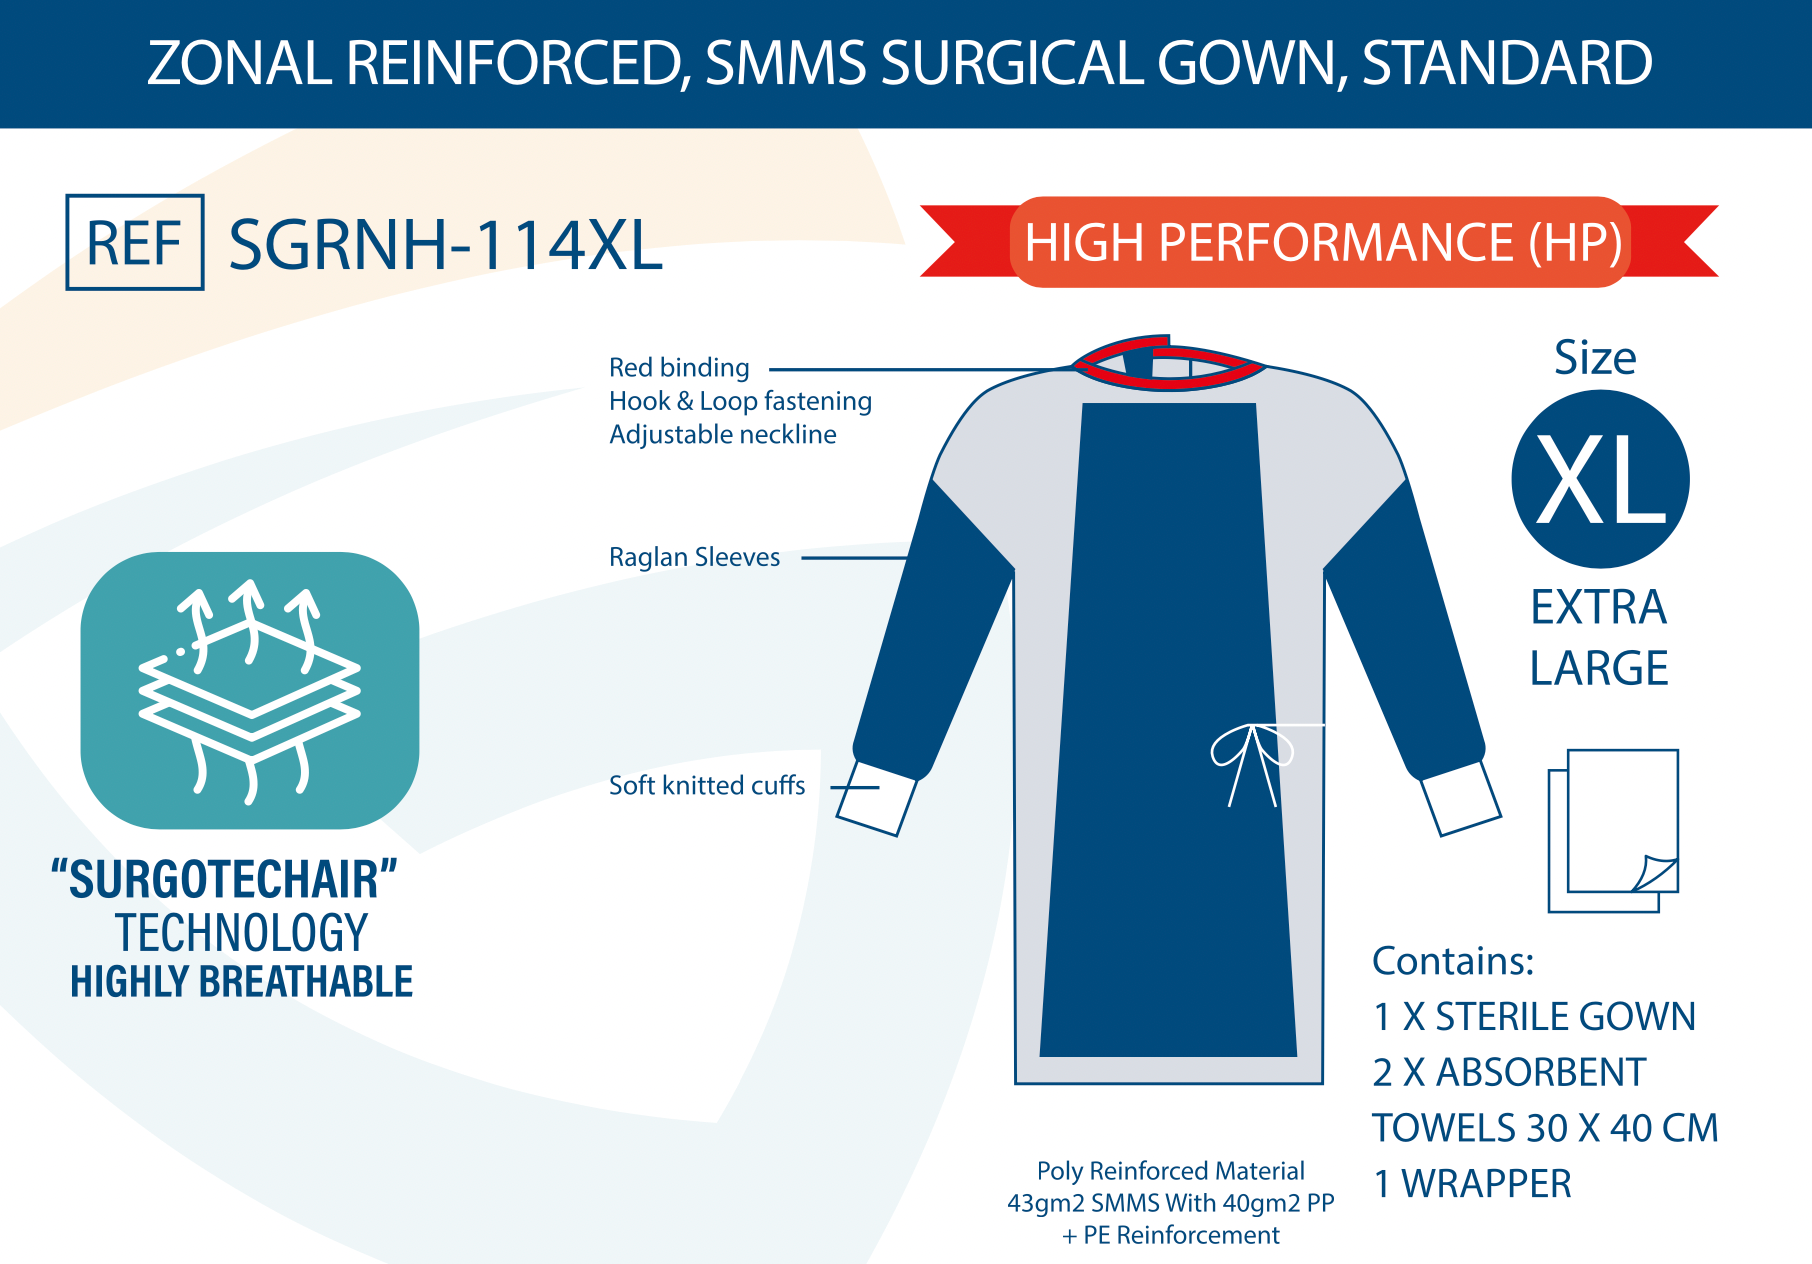 Case 40 Zonal Reinforced Sterile Surgical Gown Double Wrapped with 2 Hand Towels 30 x 40 cm 43gsm SMMS BODY with 40g PP & PE Reinforcement Fluid Alcohol Water Repellent hook and loop fastening Adjustable neckline Raglan Sleeves Size Extra Large XL EN13795